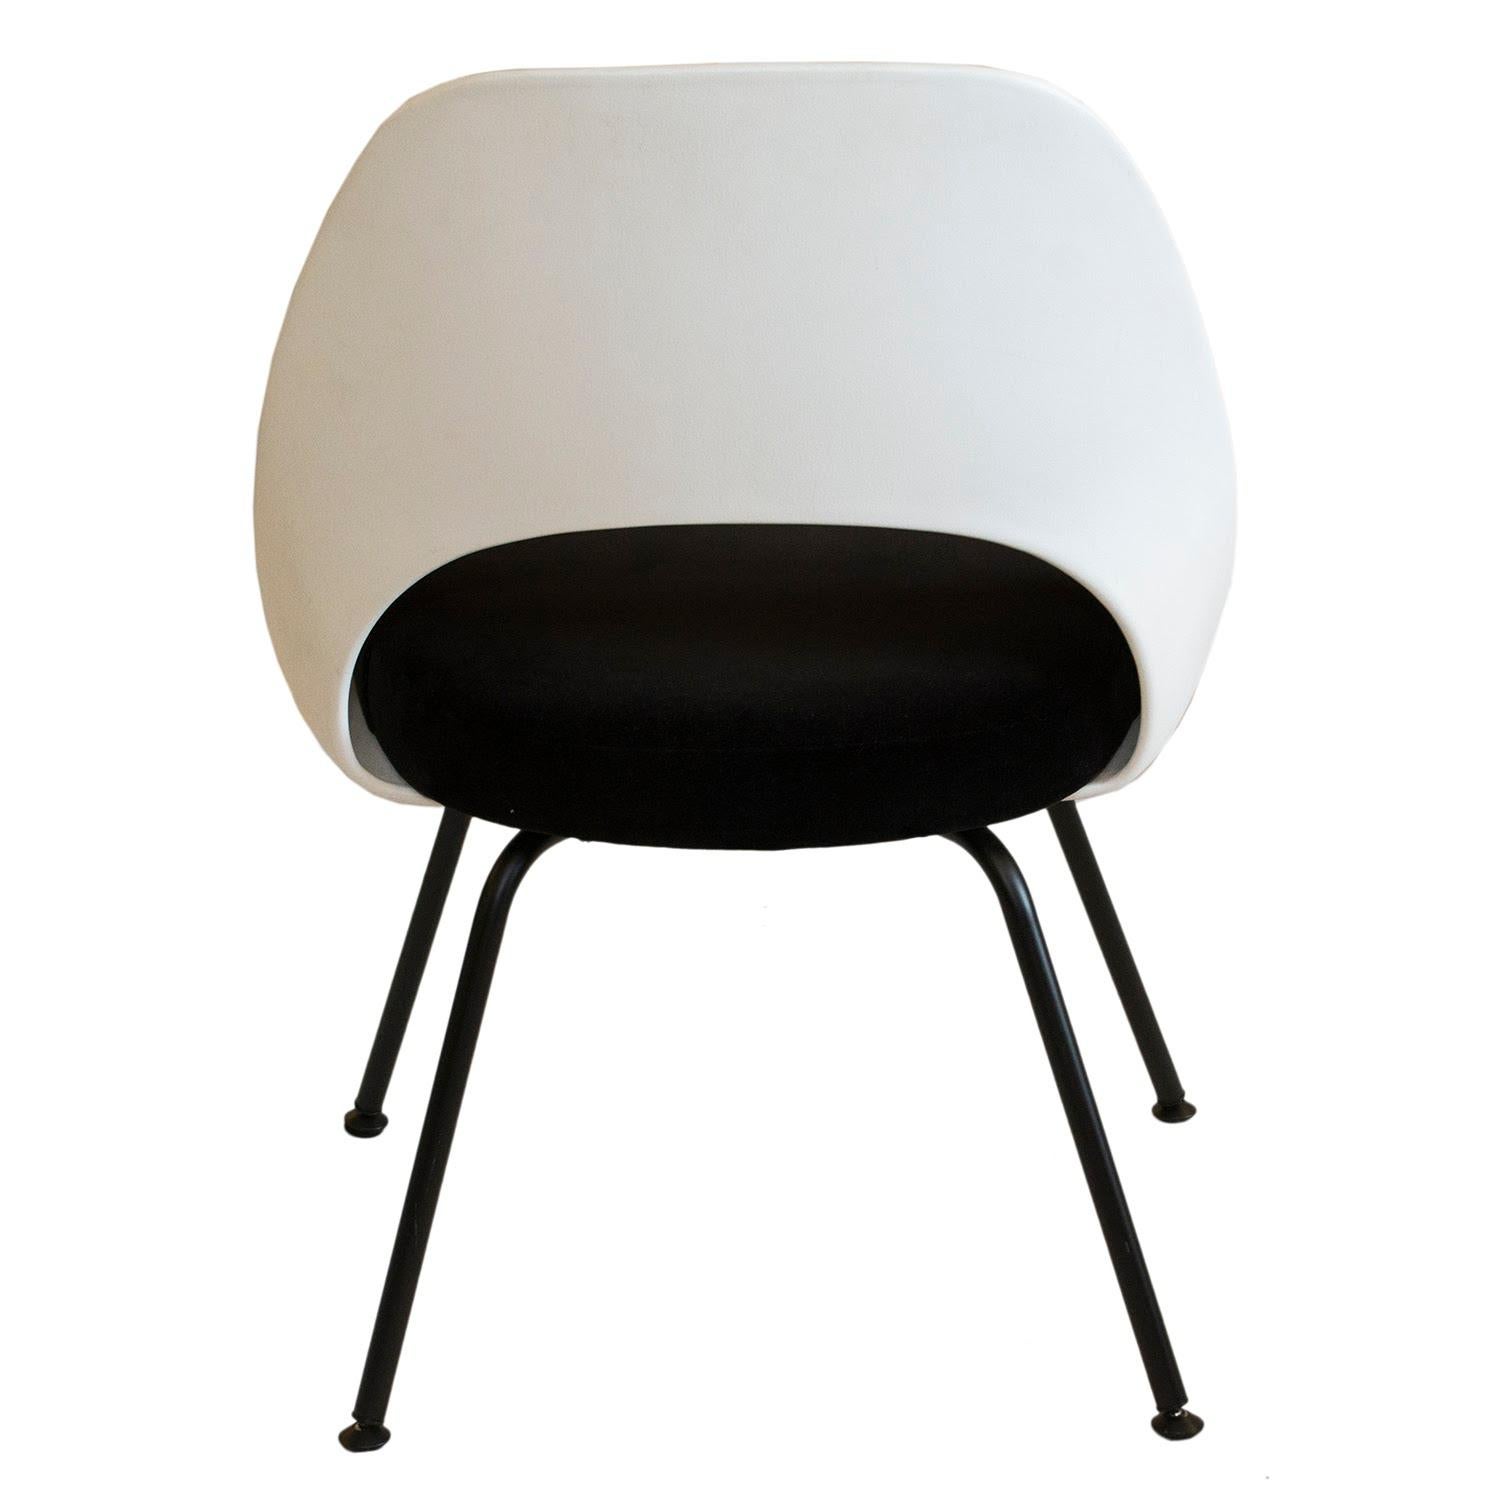 This Eero Saarinen for Knoll plastic-back side chair was reupholstered in black cotton velvet fabric. Perfect for a kitchen, as a desk chair, or a single chair in any room of the house. You can also create your own set from our unique offerings of